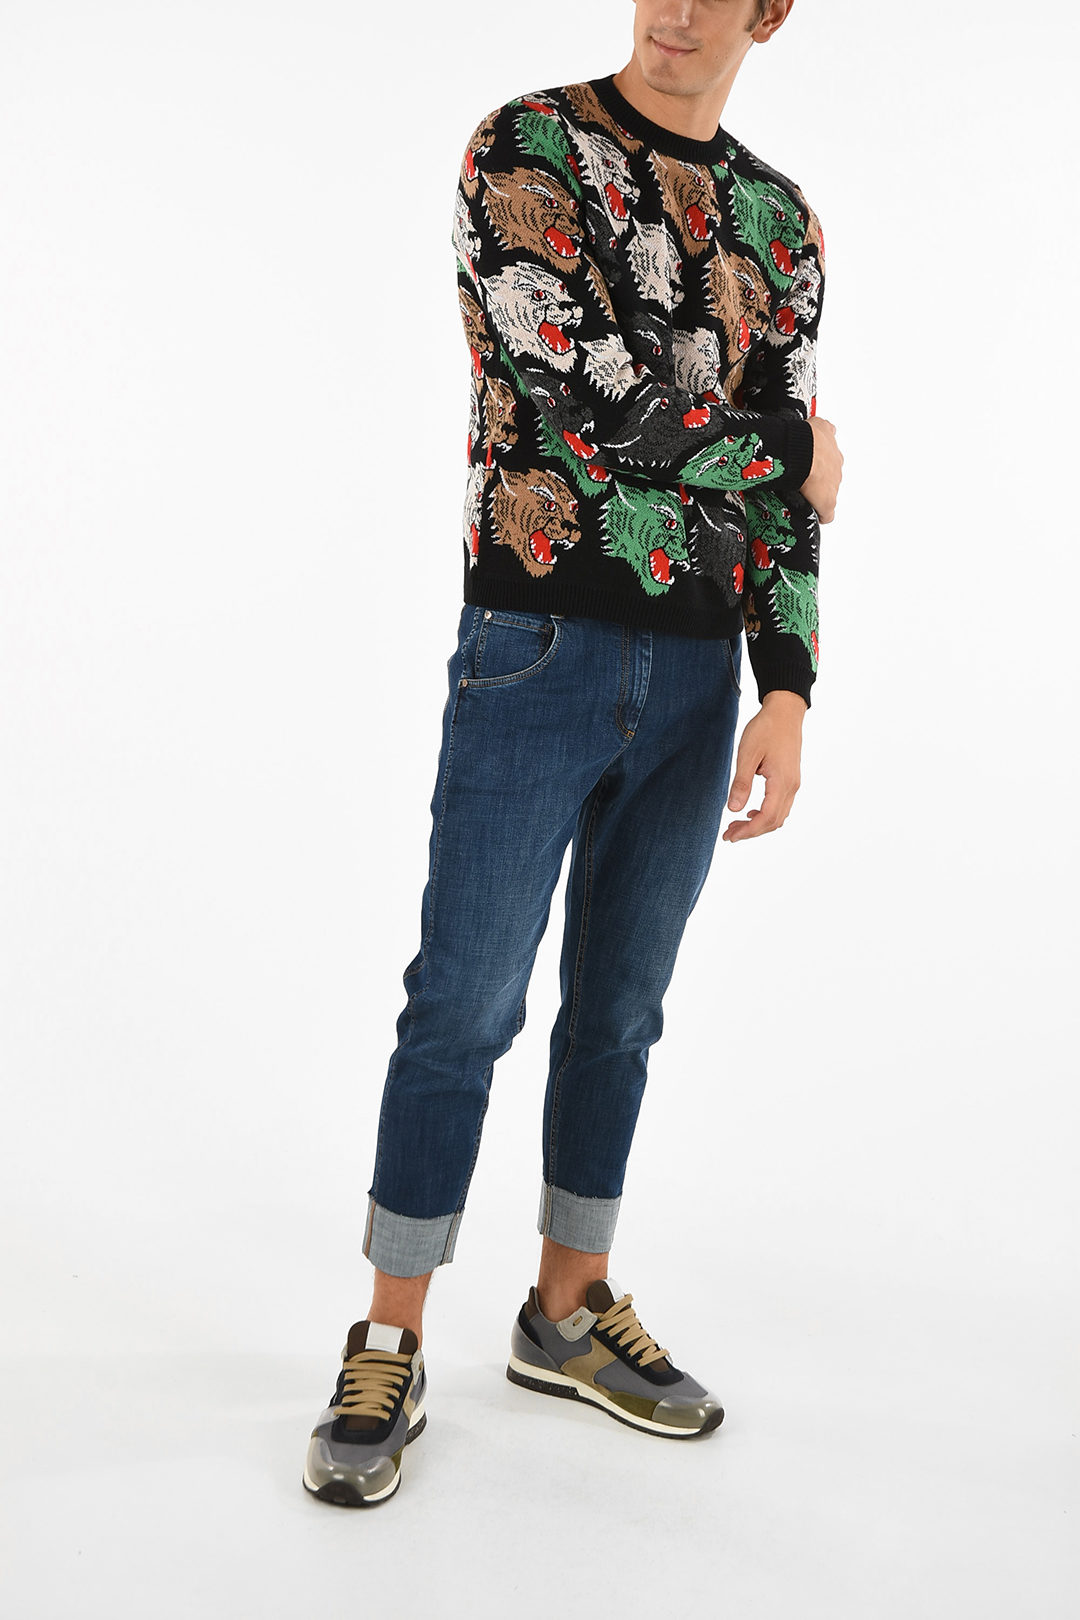 Gucci Tiger embroidered sweater men - Glamood Outlet